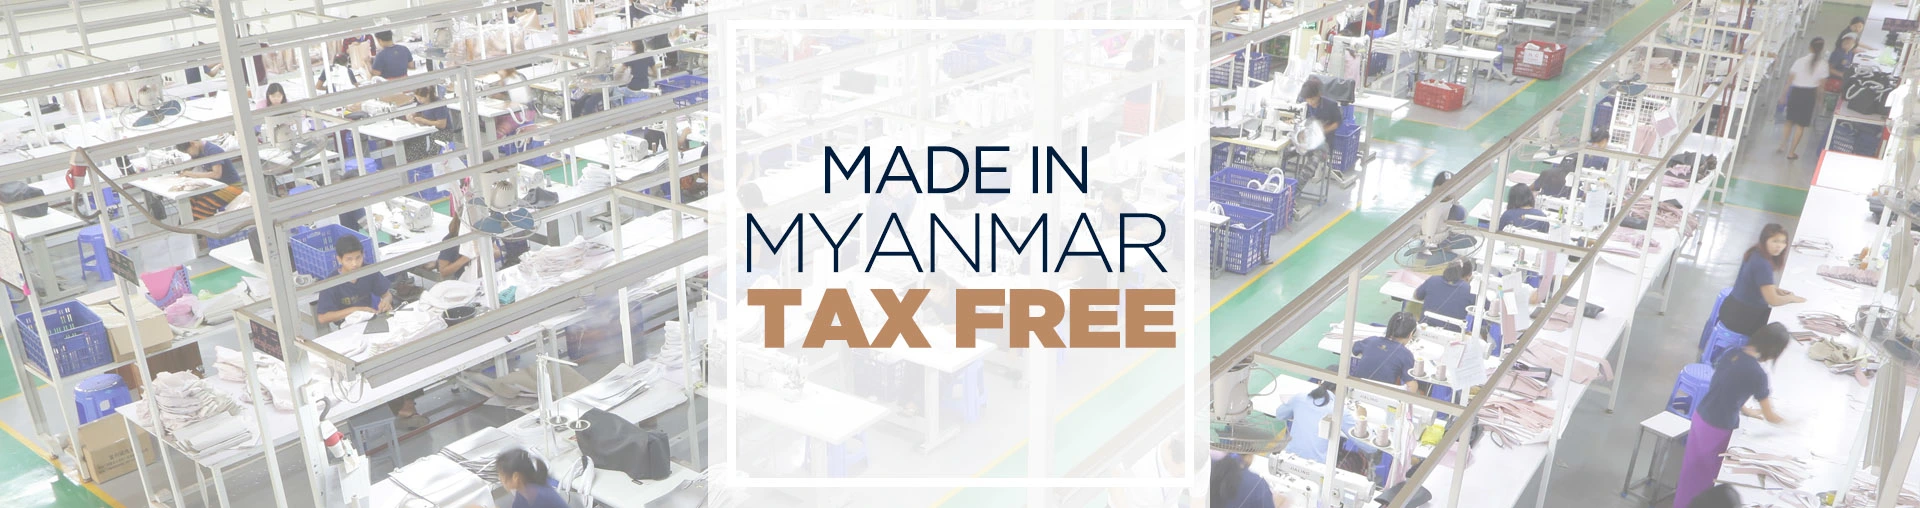 MADE IN MYANMAR, TAX FREE